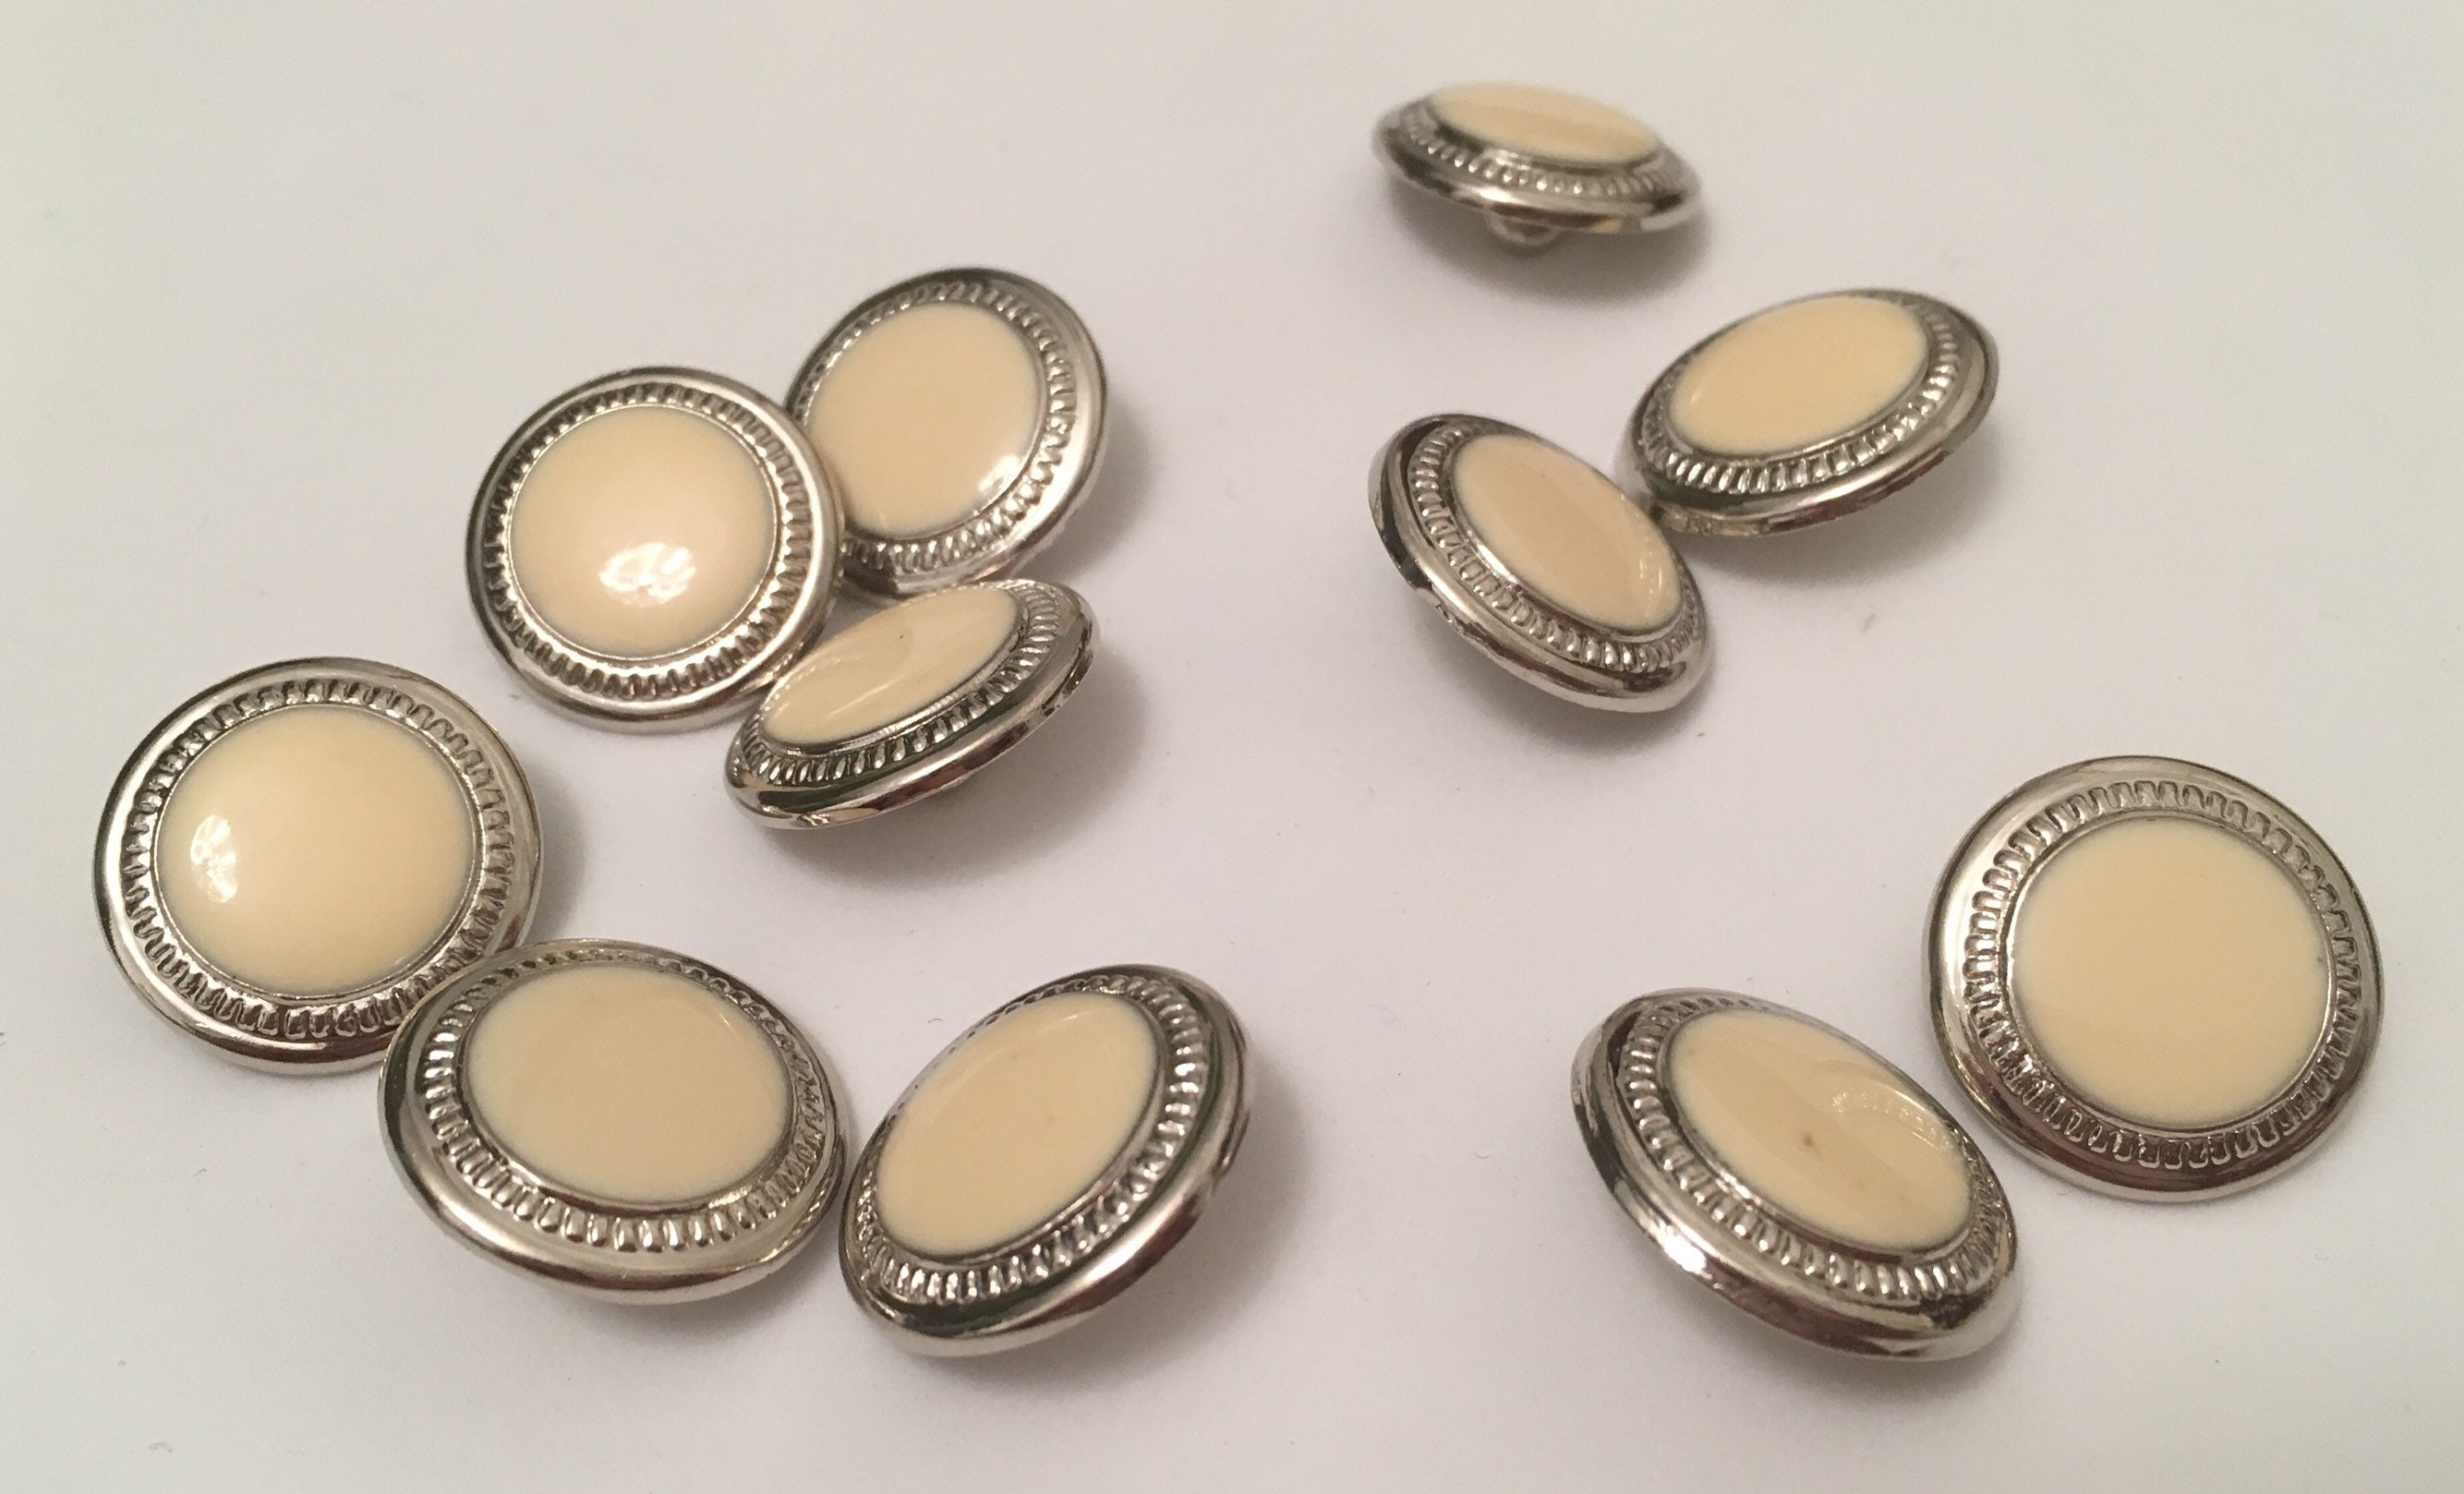 10 Antiqued Silver Metal Buttons 14mm X 14mm 4 Hole Silver Button